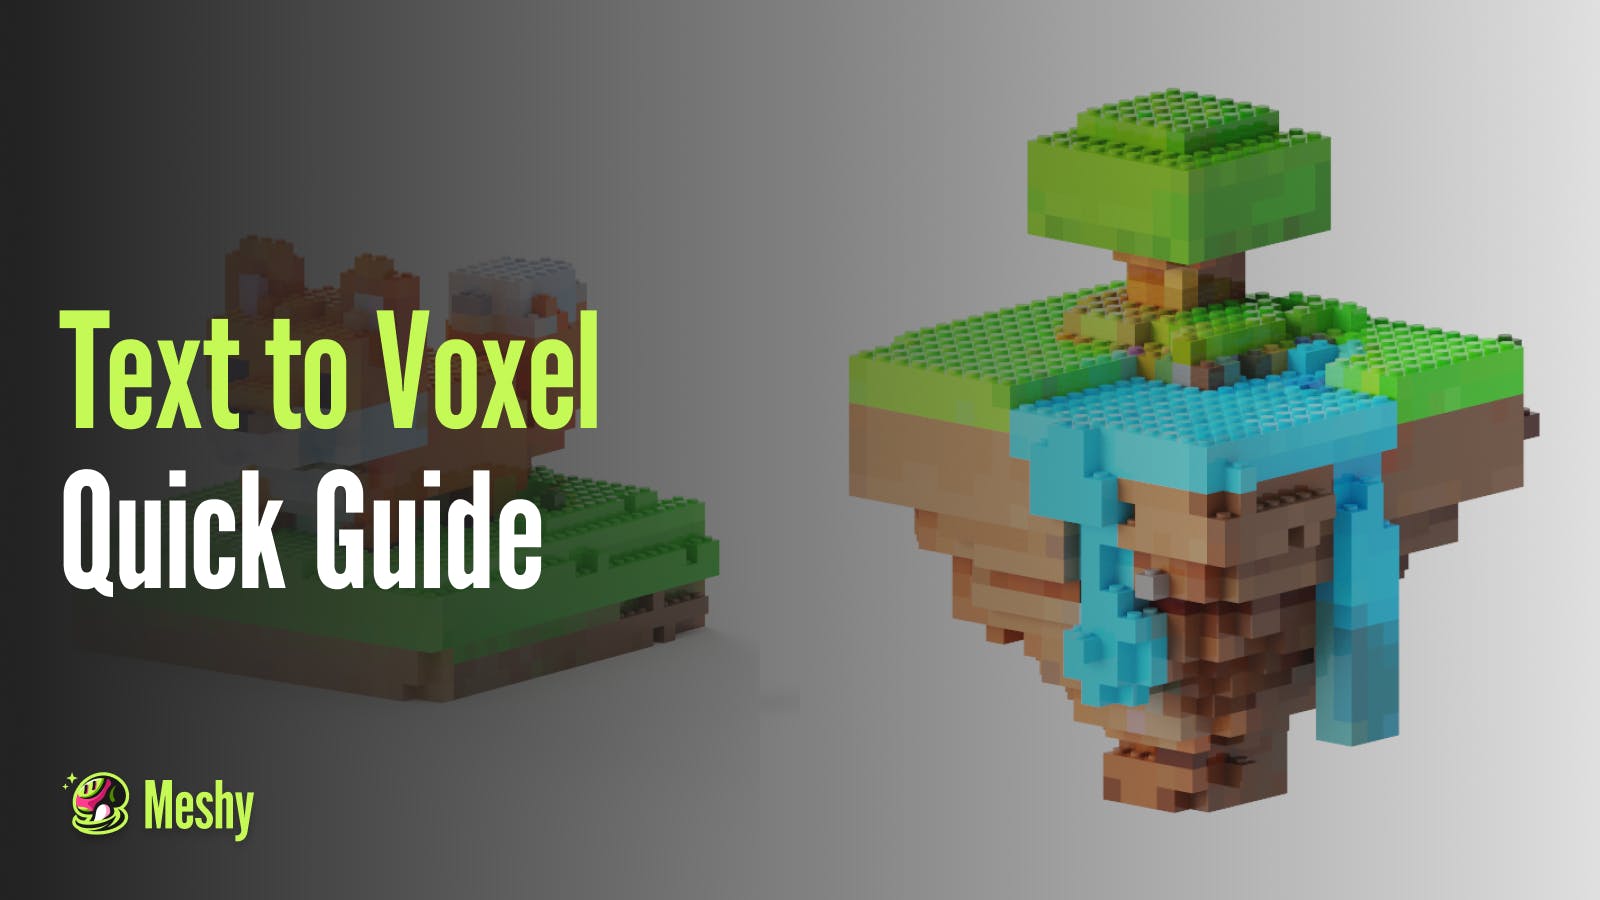 Meshy + MagicaVoxel: Create Stunning Voxel Game Assets in Just 1 Minute